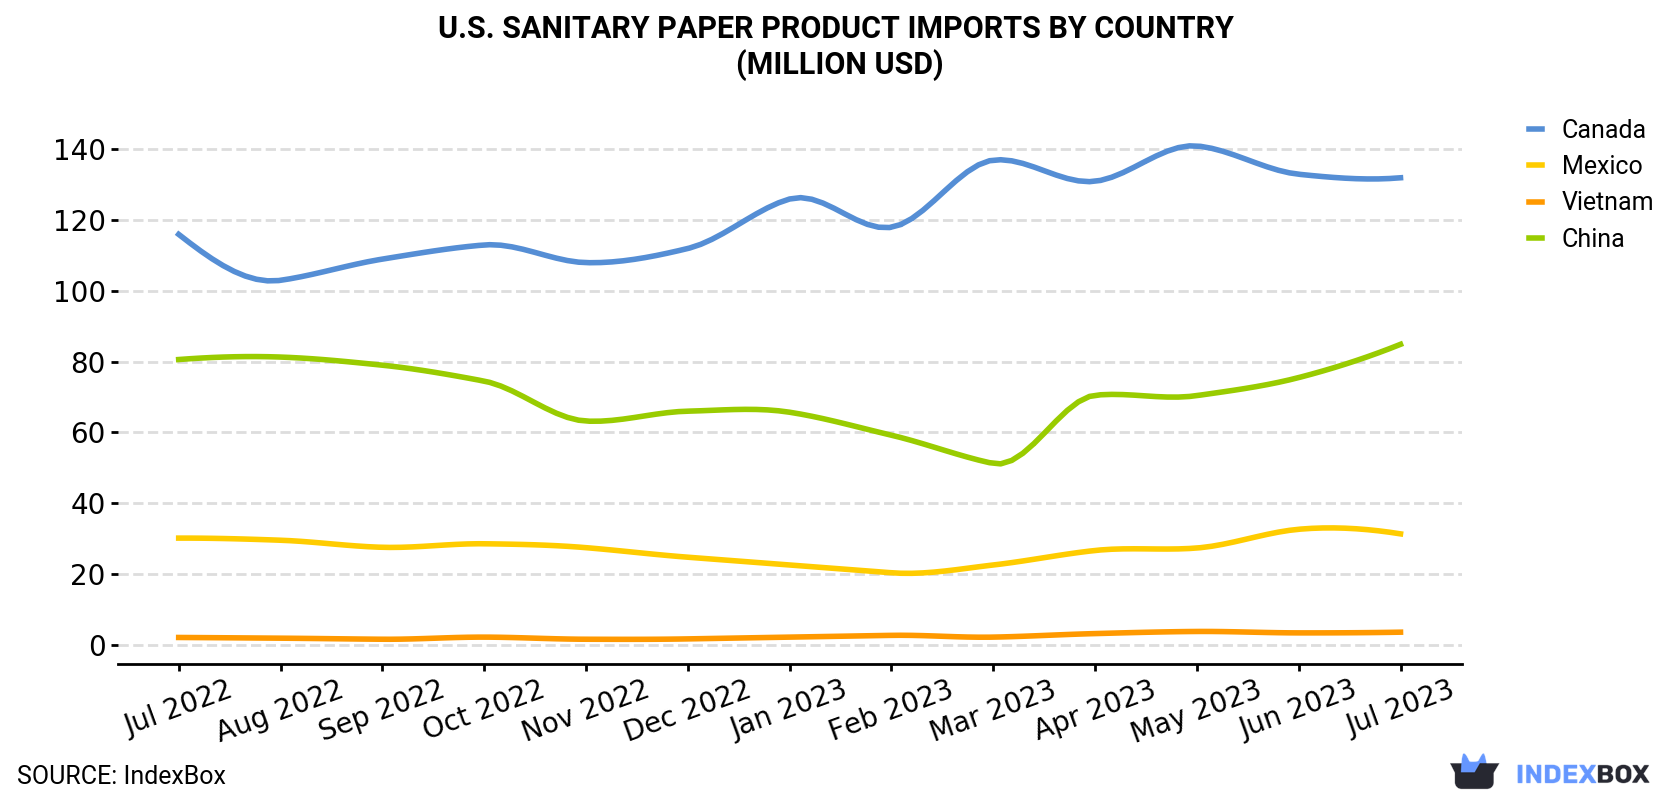 U.S. Sanitary Paper Product Imports By Country (Million USD)